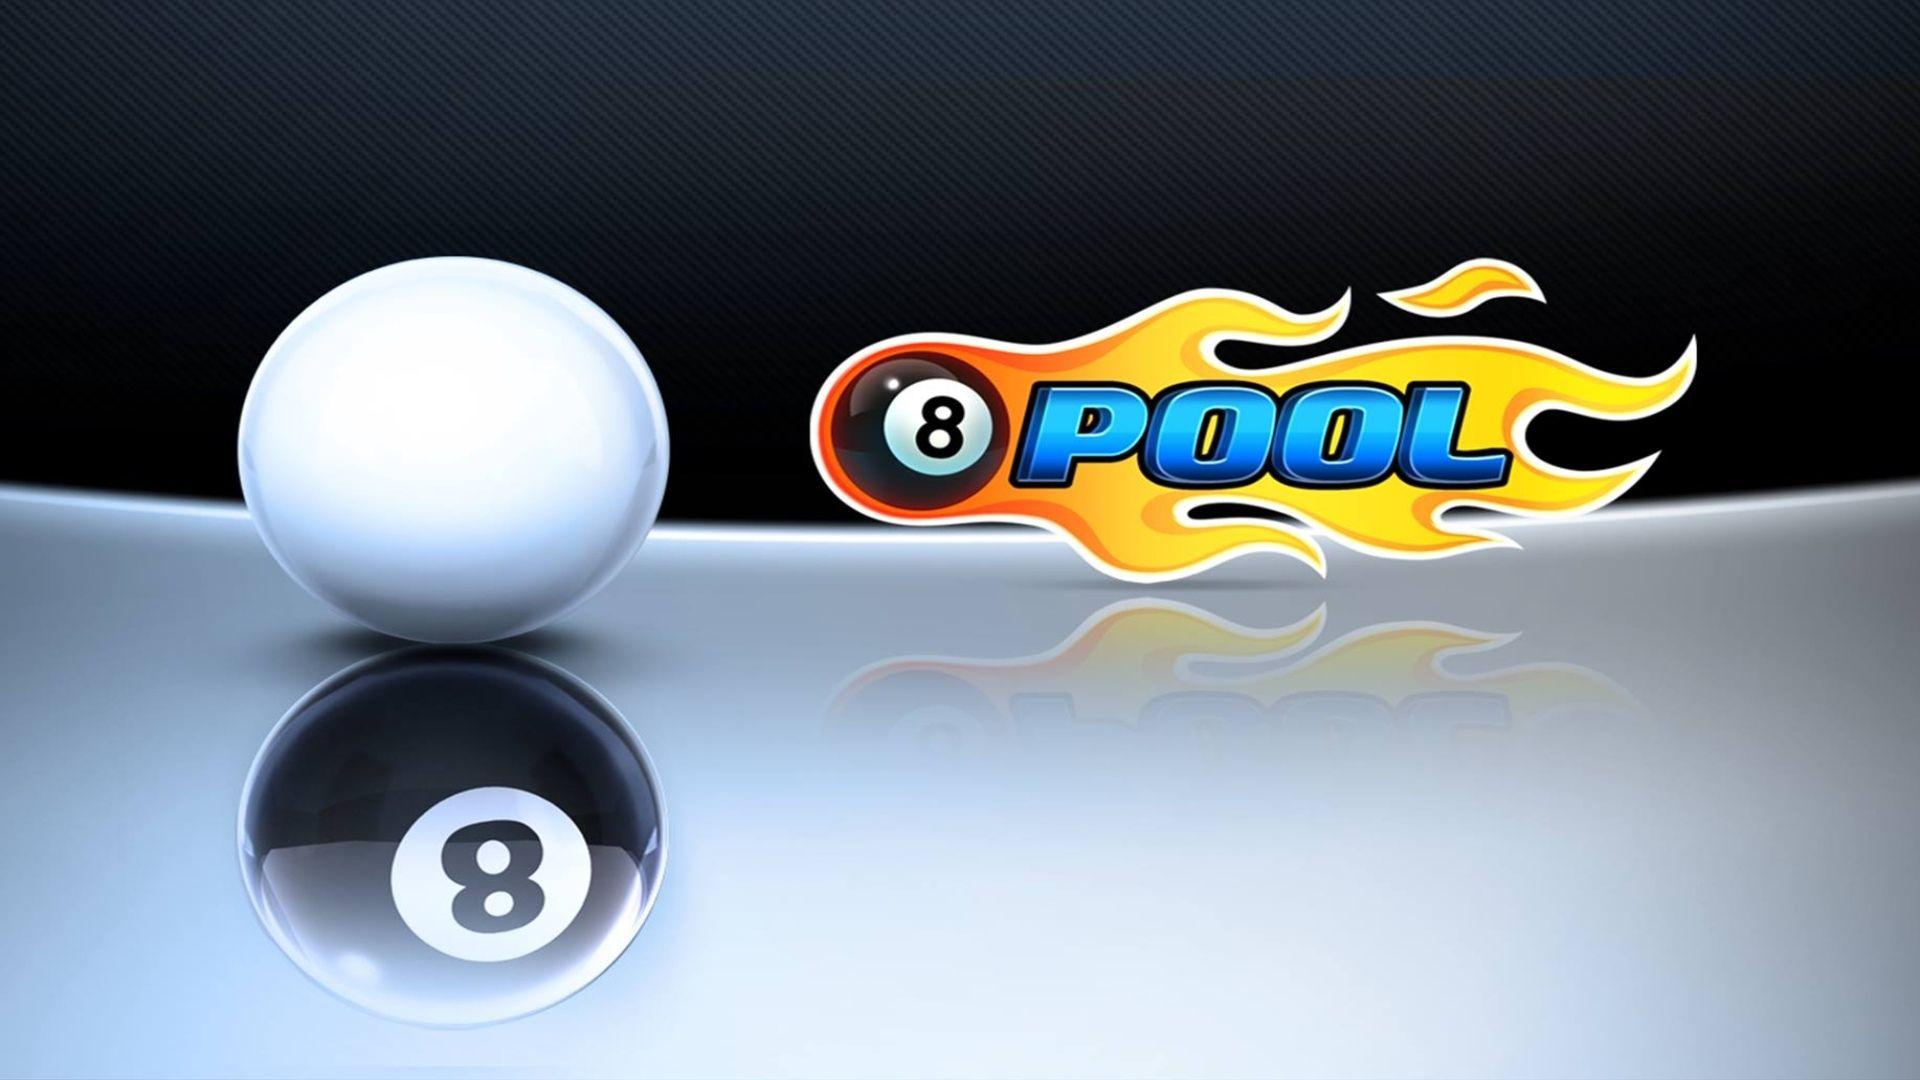 8 Ball Pool Wallpapers Top Free 8 Ball Pool Backgrounds Wallpaperaccess